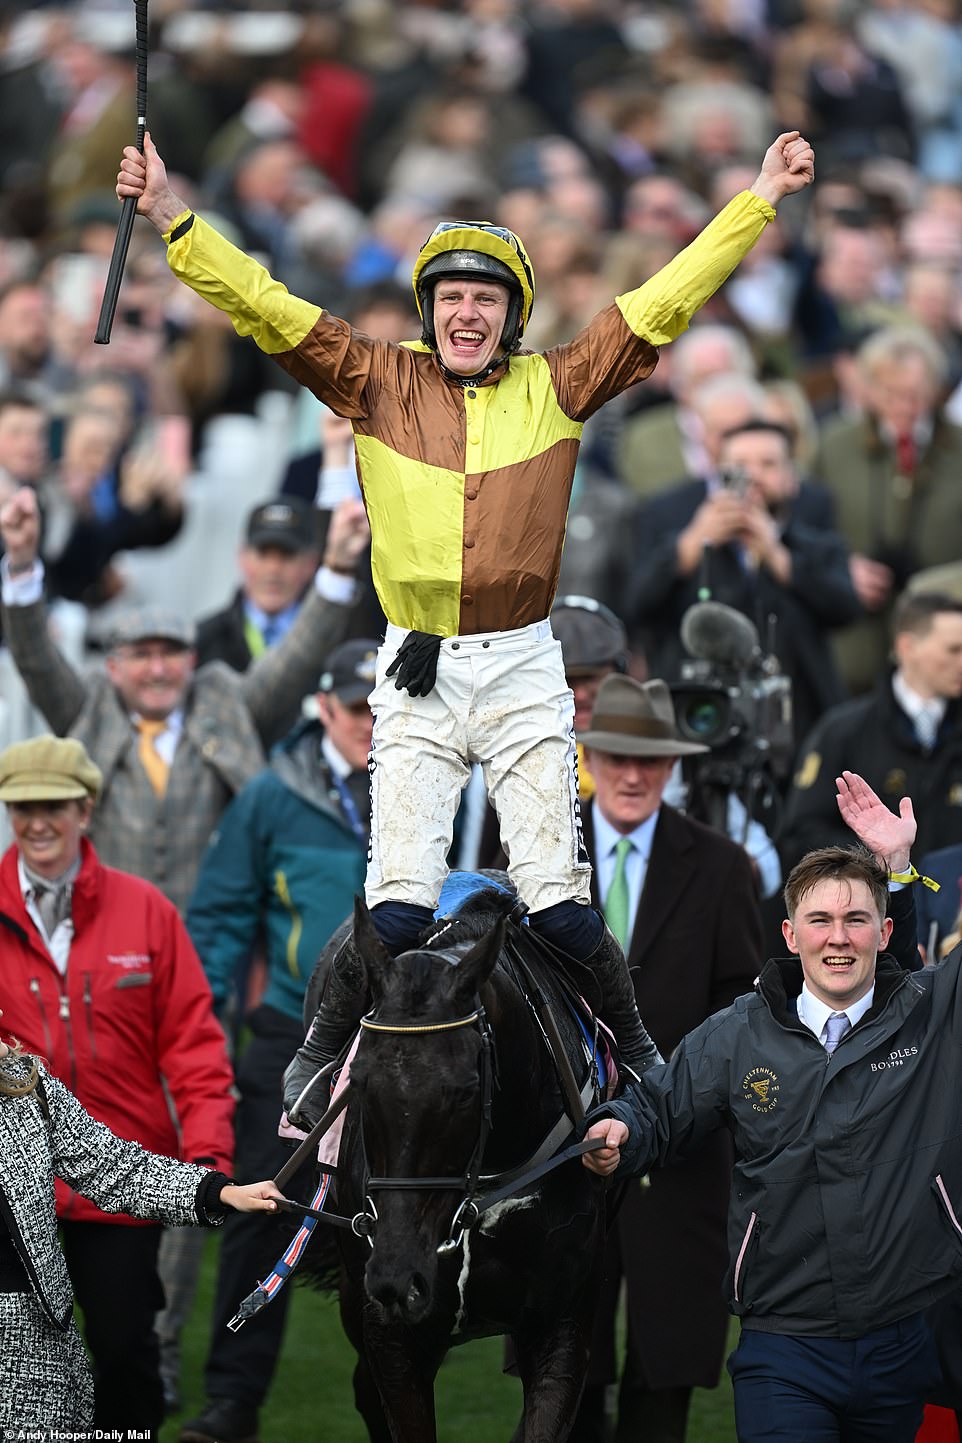 Notable jockey Paul Townend celebrates after winning the Gold Cup on Galopin Des Champs, who defended his title